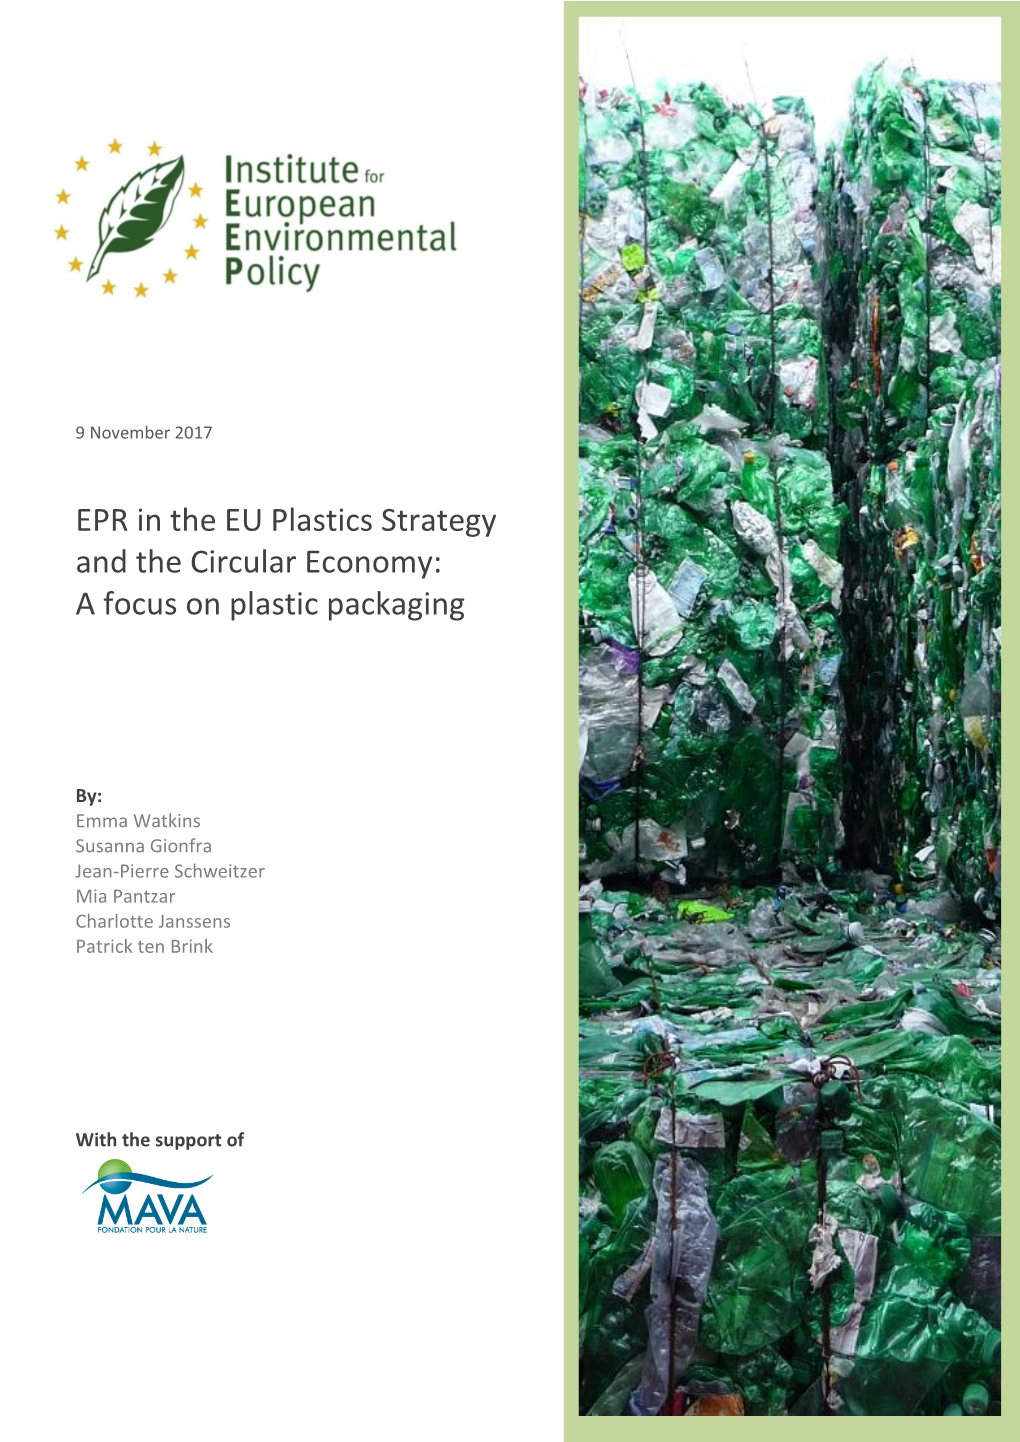 EPR in the EU Plastics Strategy and the Circular Economy: a Focus on Plastic Packaging